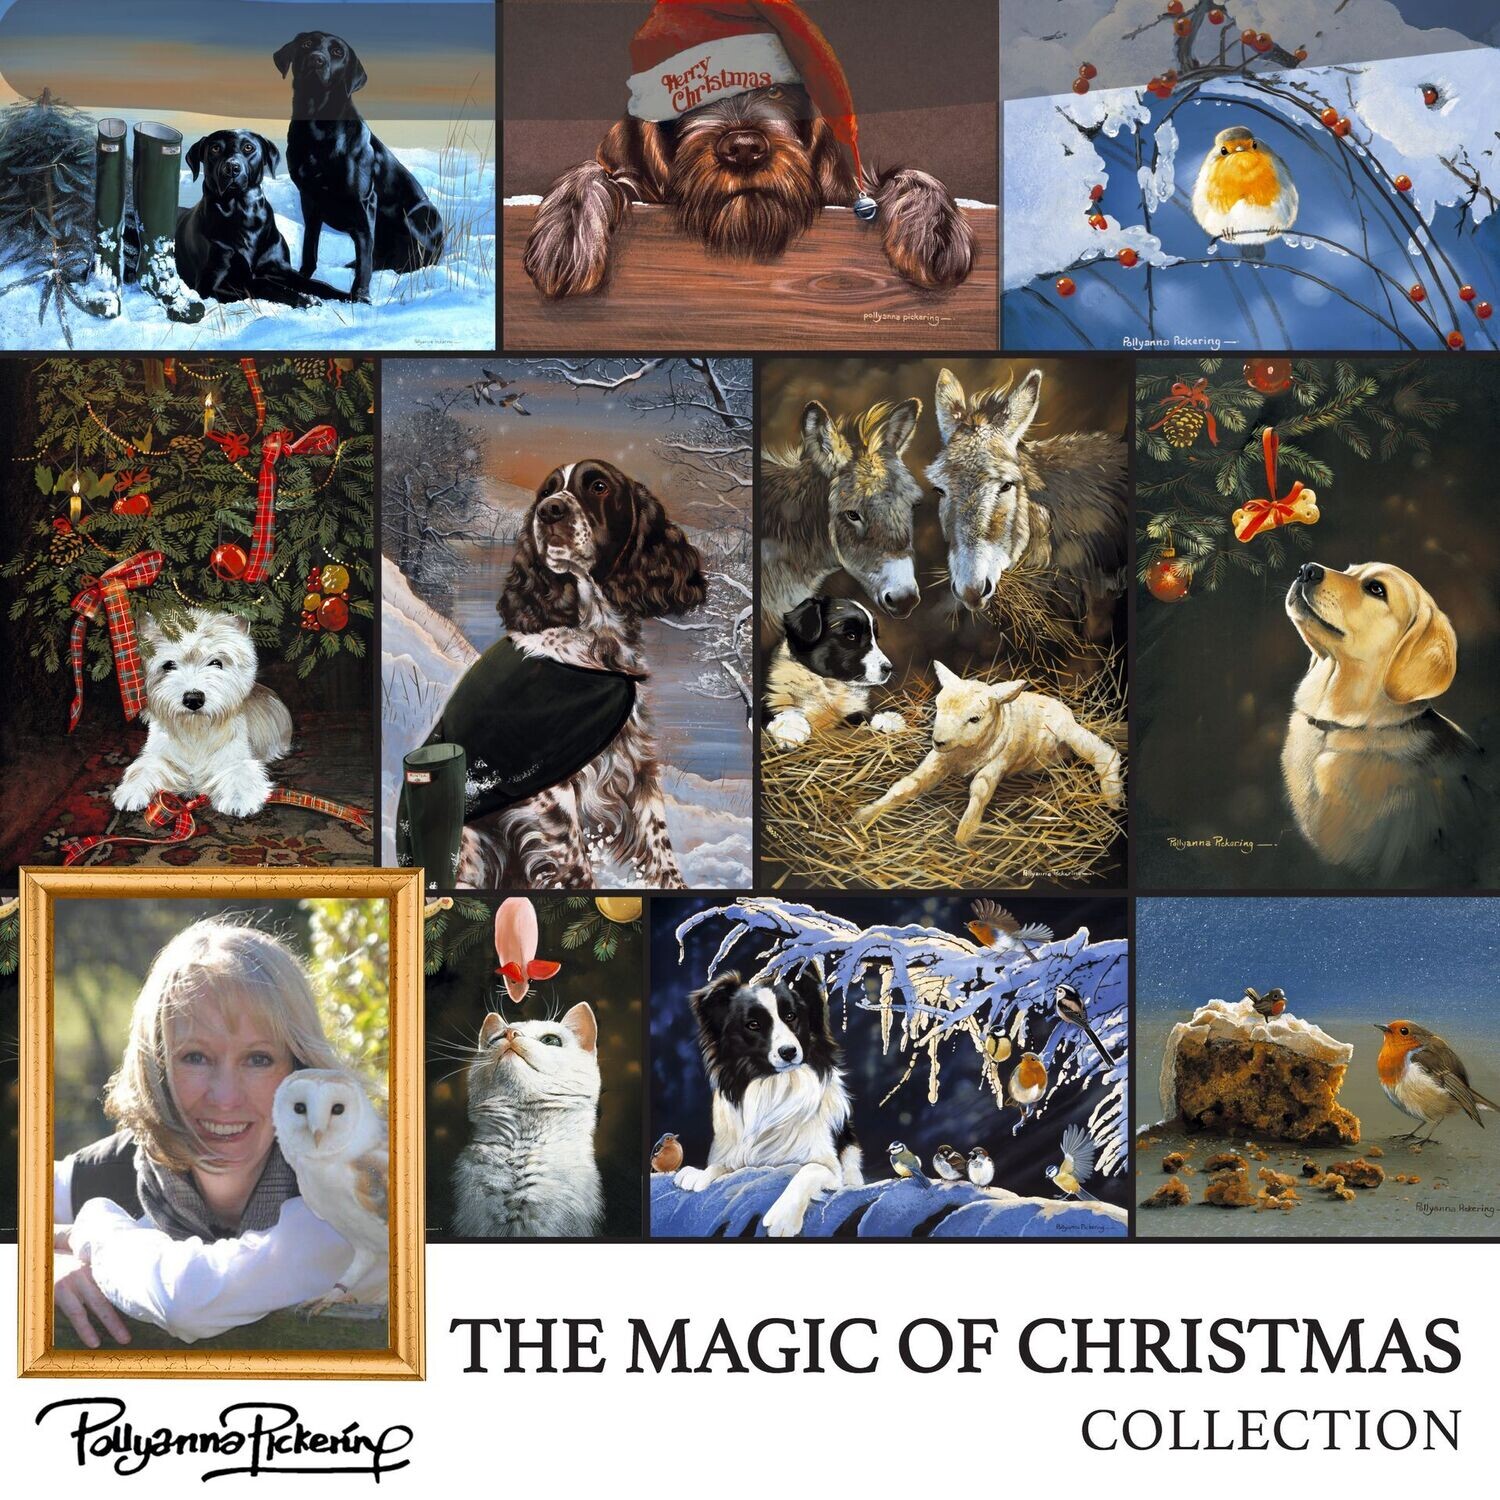 Pollyanna Pickering's The Magic of Christmas Digital Collection